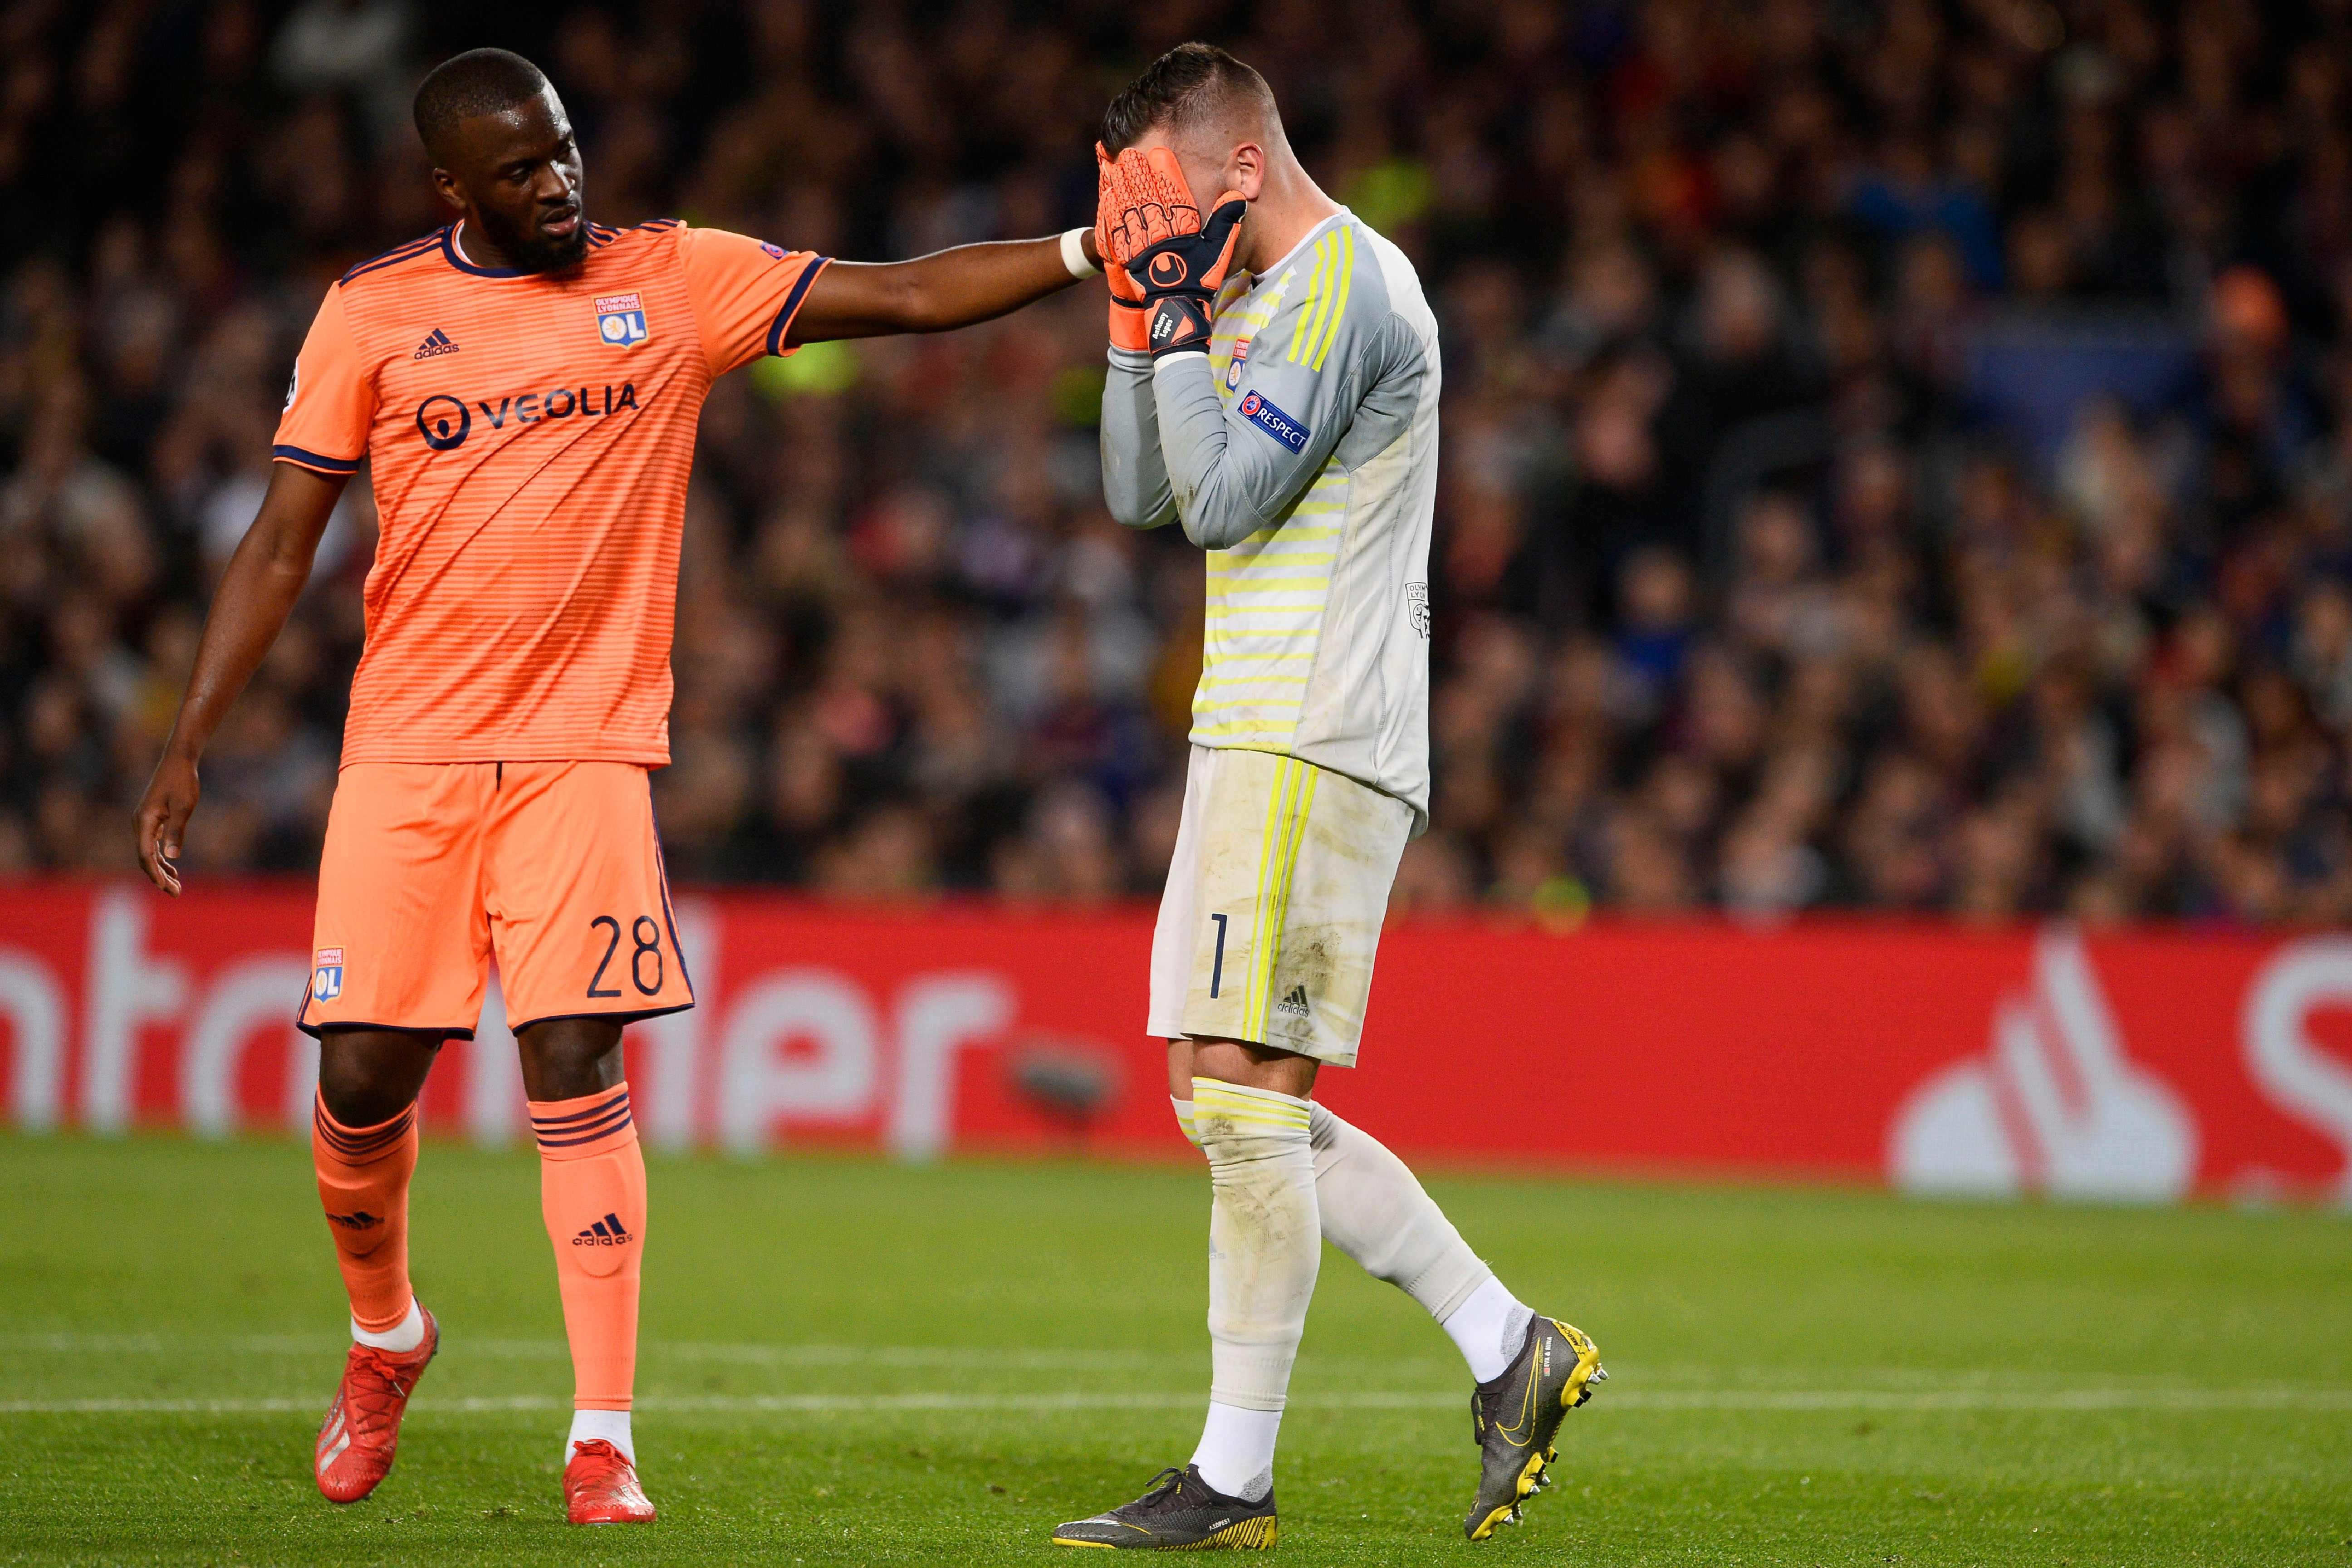 Lyon's French forward Tanguy NDombele Alvaro (L) conforts Lyon's Portuguese goalkeeper Anthony Lopes during the UEFA Champions League round of 16, second leg football match between FC Barcelona and Olympique Lyonnais at the Camp Nou stadium in Barcelona on March 13, 2019. (Photo by Josep LAGO / AFP)